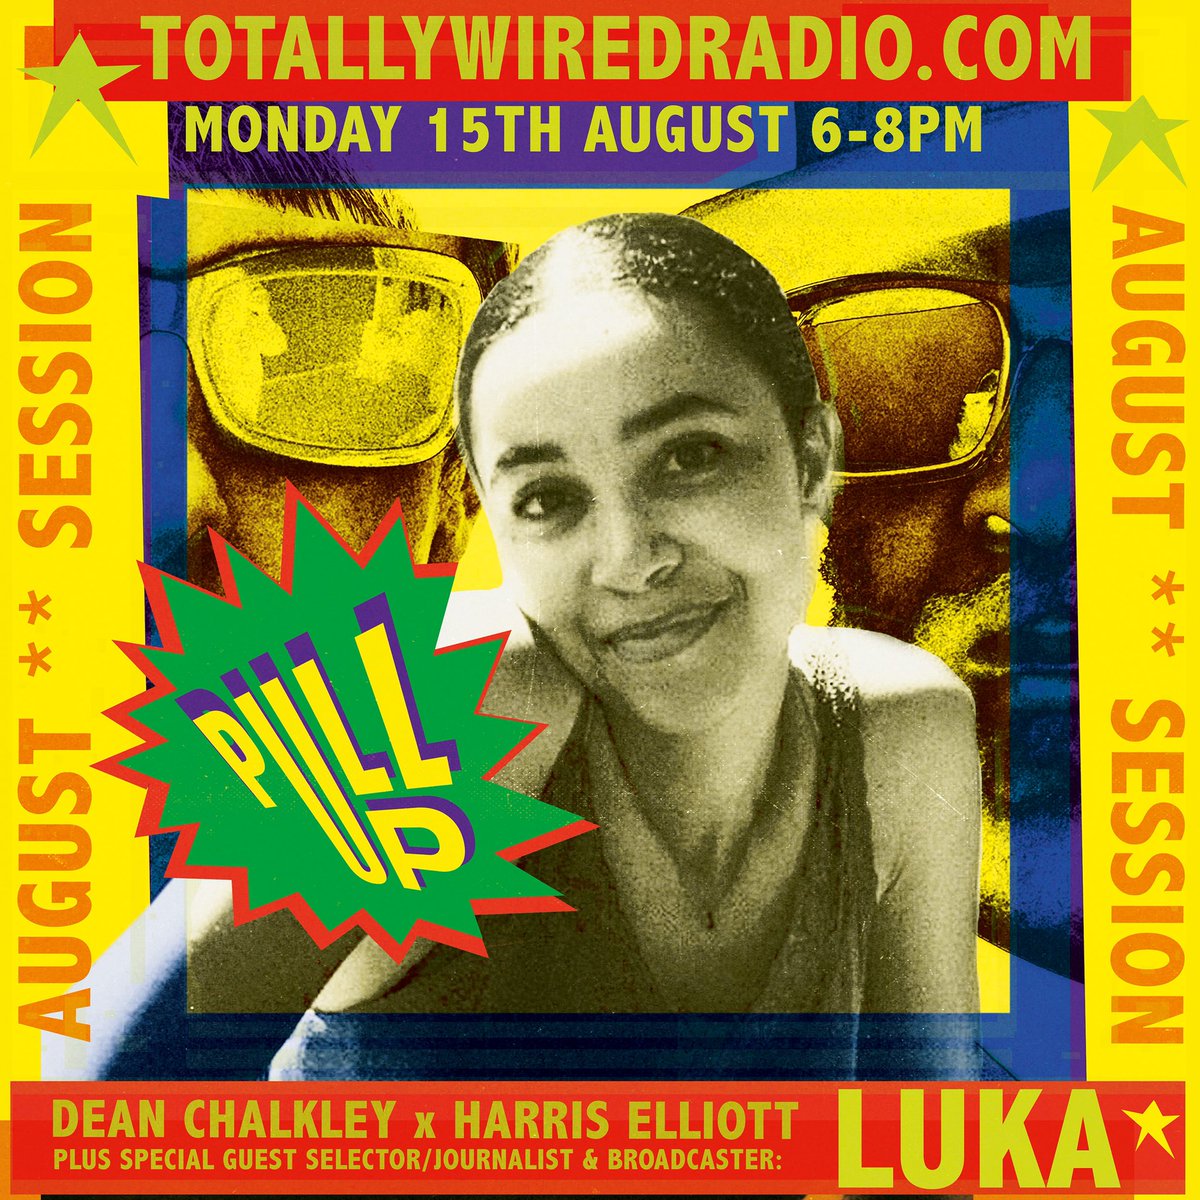 Pull Up!! Monday 15th Aug. 6-8pm Harris x I are back on the totallywiredradio.com digital airways. This month we’re welcoming LUKA who’s gonna join in the musical selection & chat, so set your clocks for the soundz 🔊🔊💥💥... @RadioWired